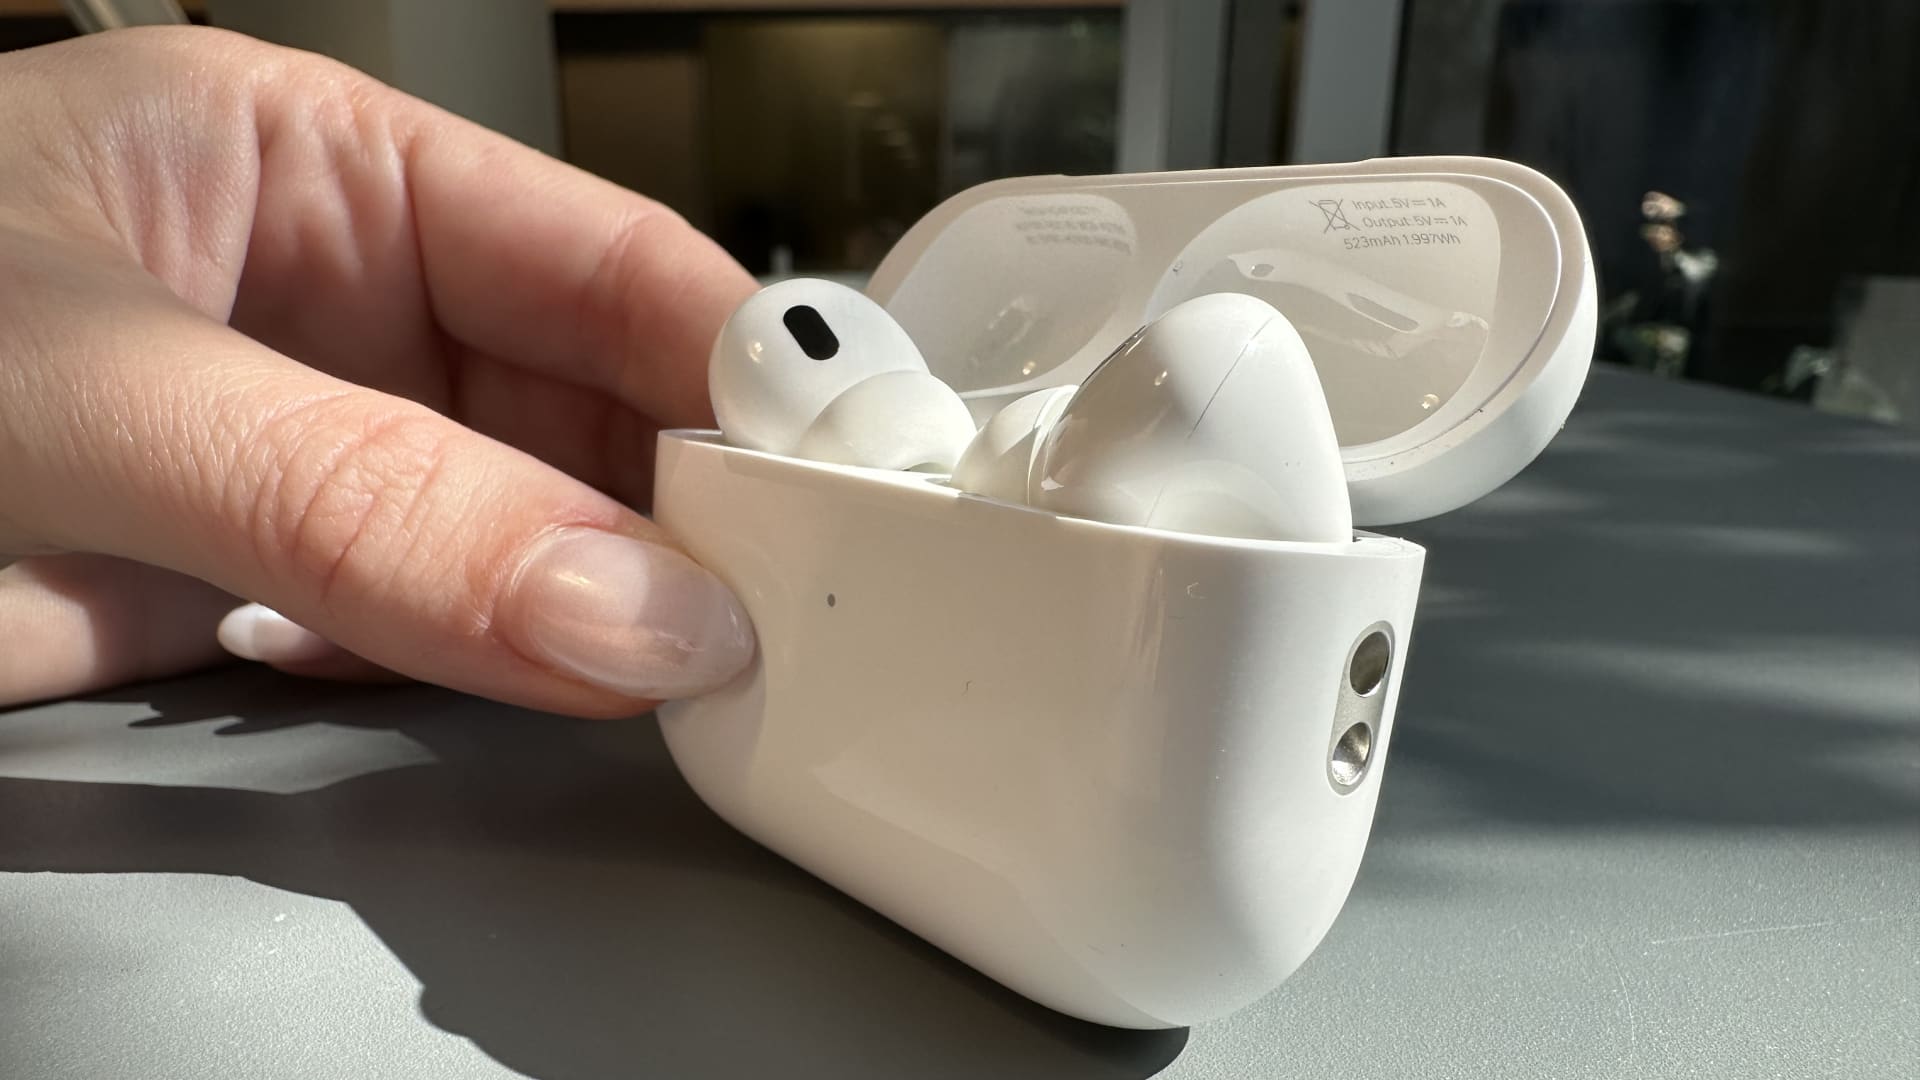 How to get the most out of Apple’s new AirPods – CNBC